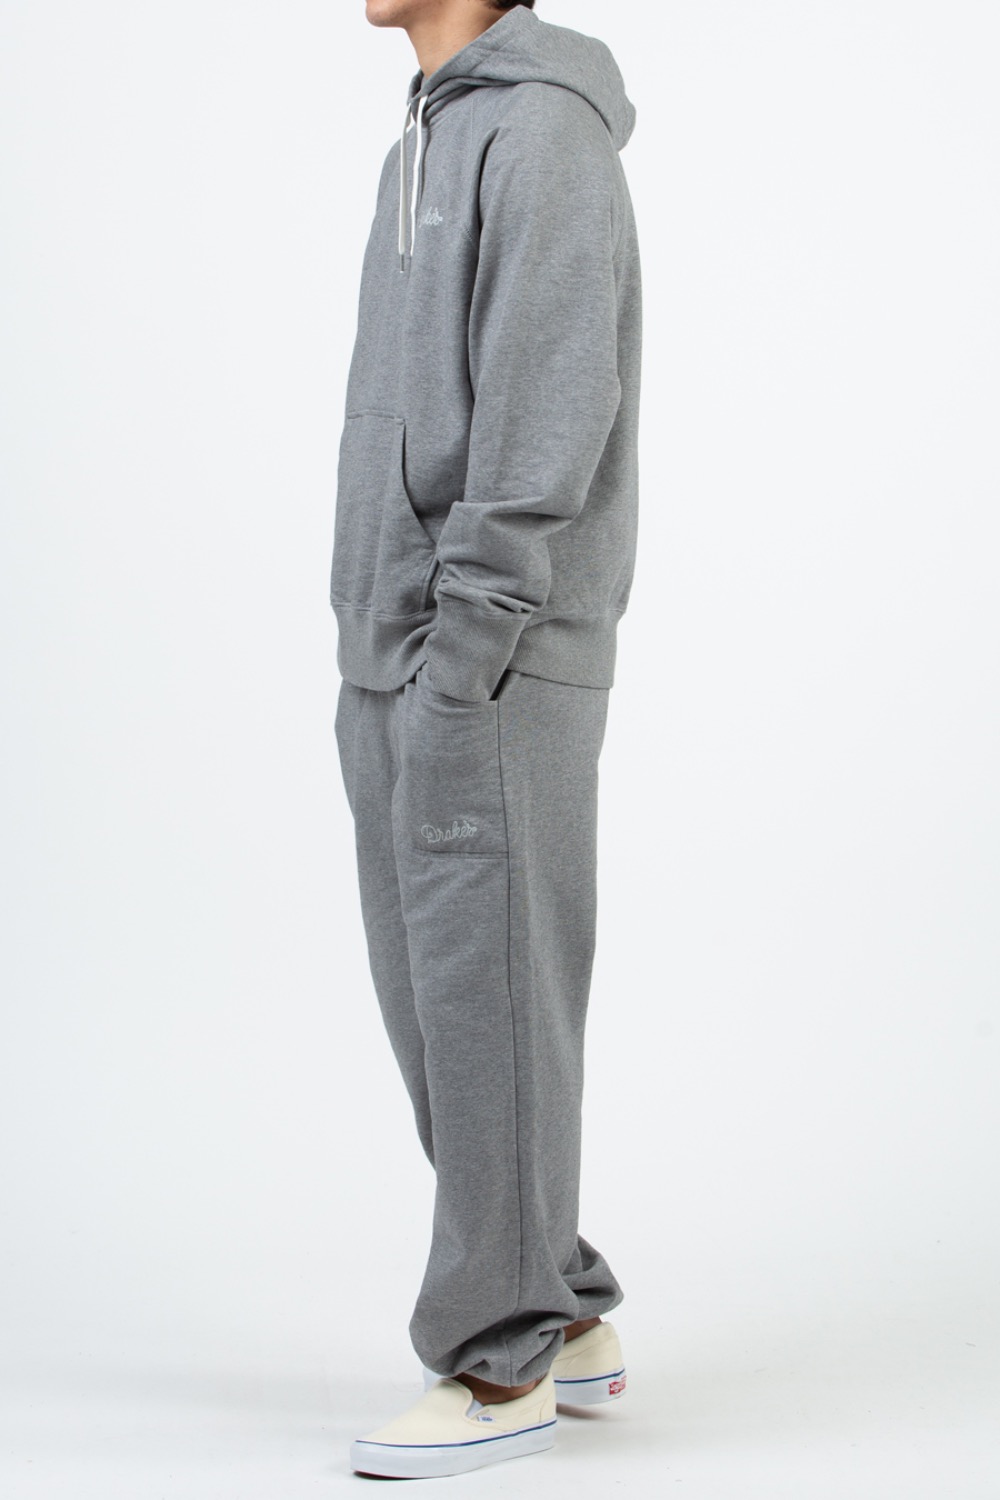 (CARRY OVER) GREY COTTON JOGGING BOTTOMS GREY